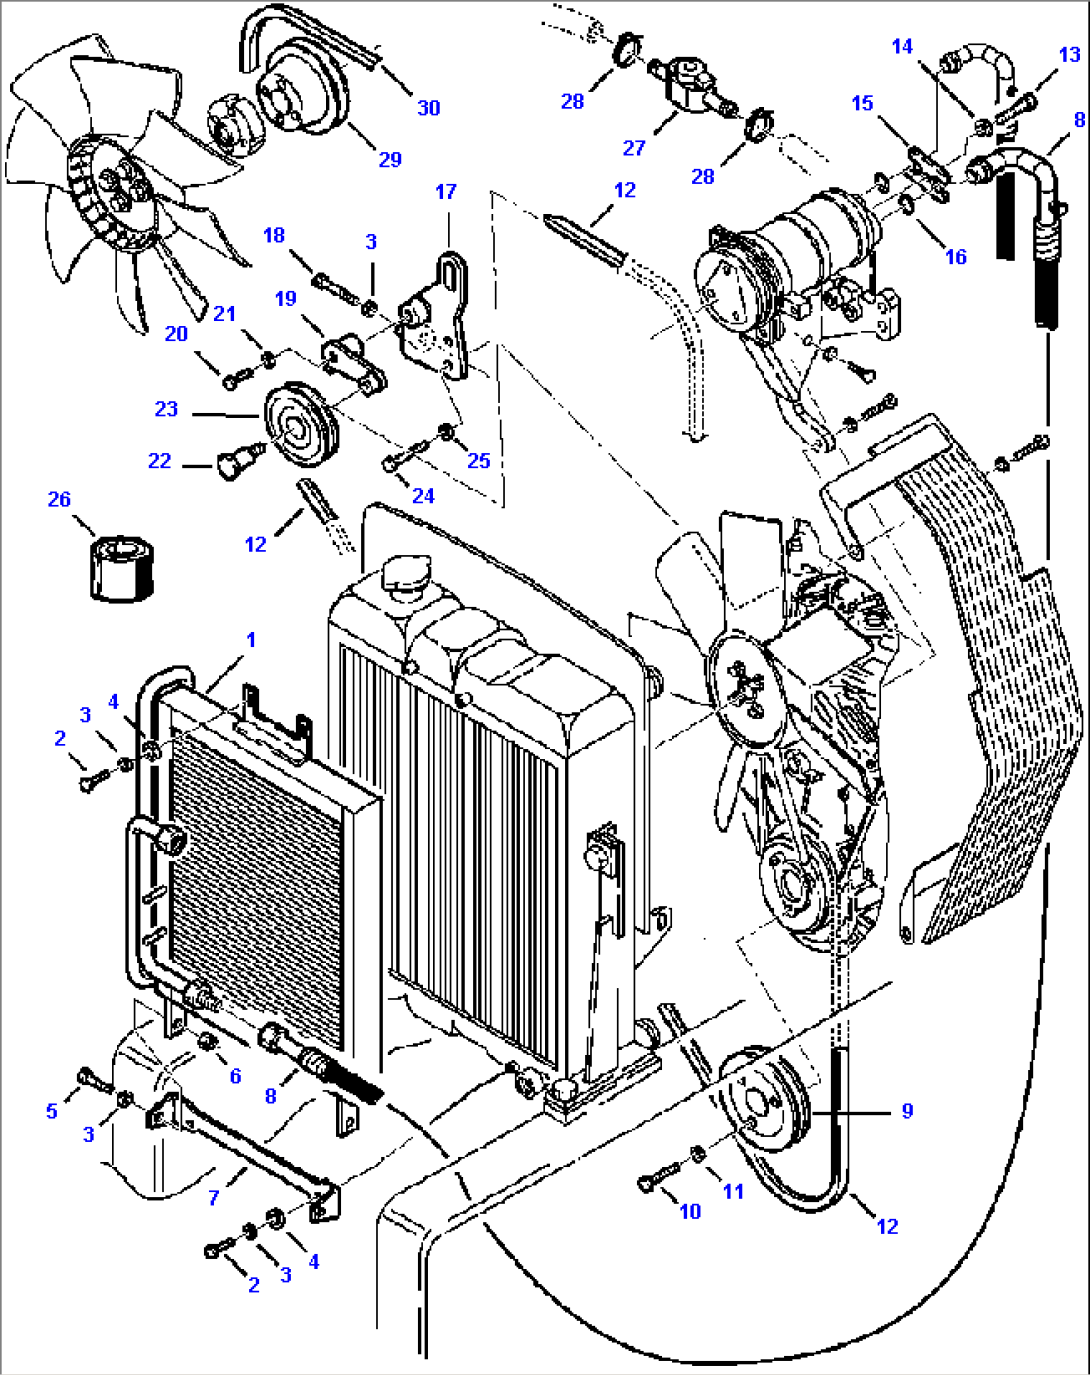 FIG. K5700-02A3 AIR CONDITIONER - CONDENSER PIPING